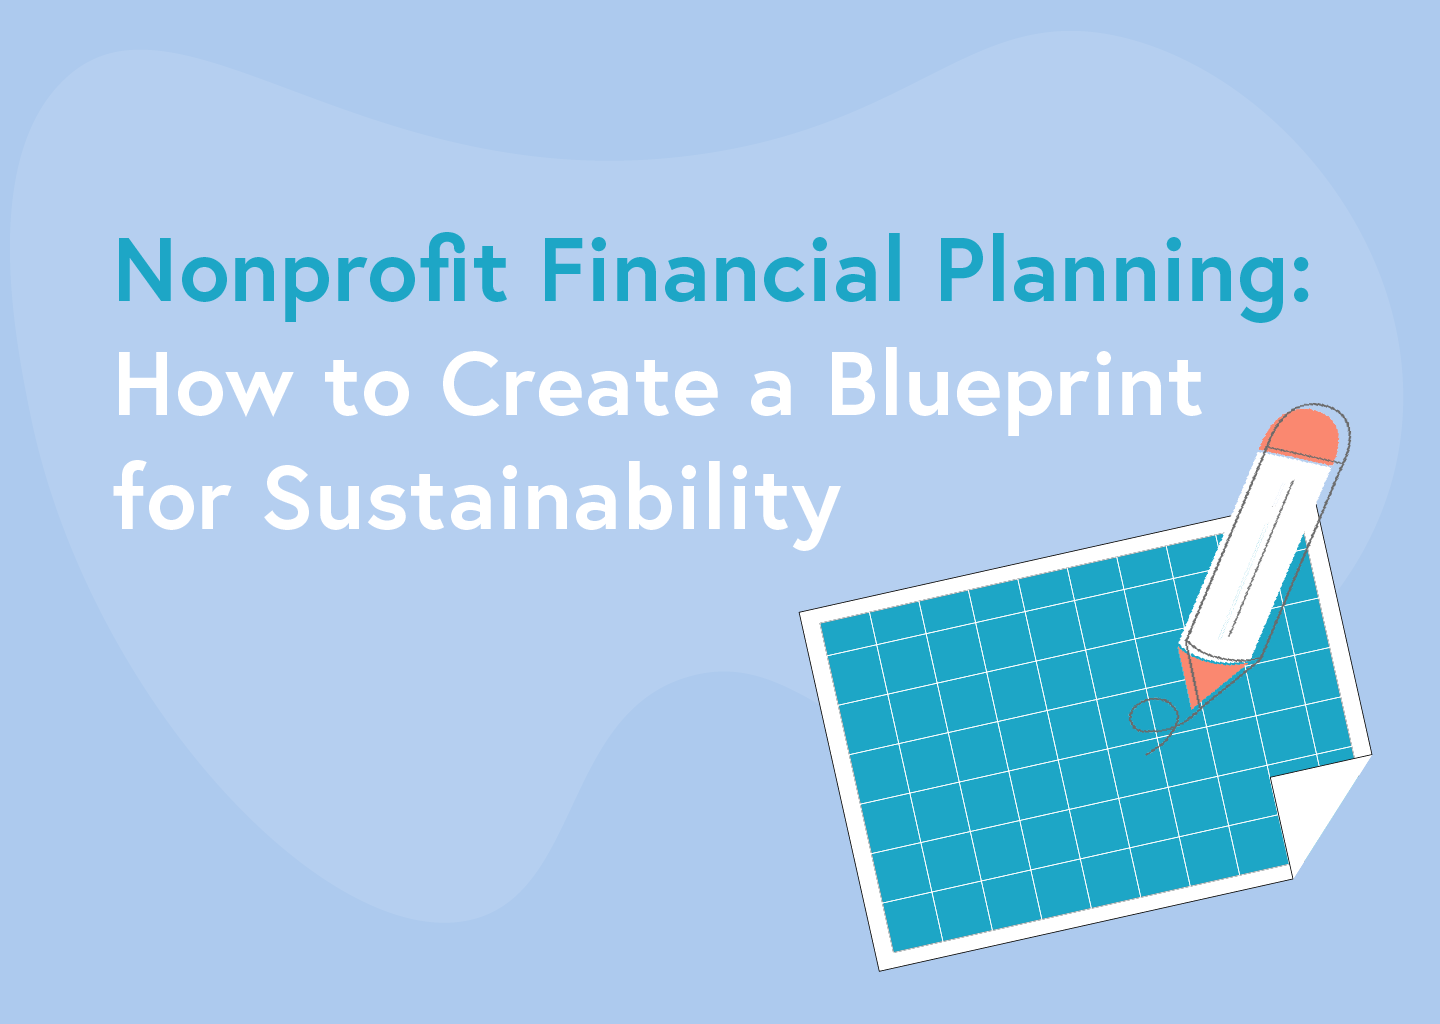 Nonprofit Financial Planning: How to Create a Blueprint for Sustainability